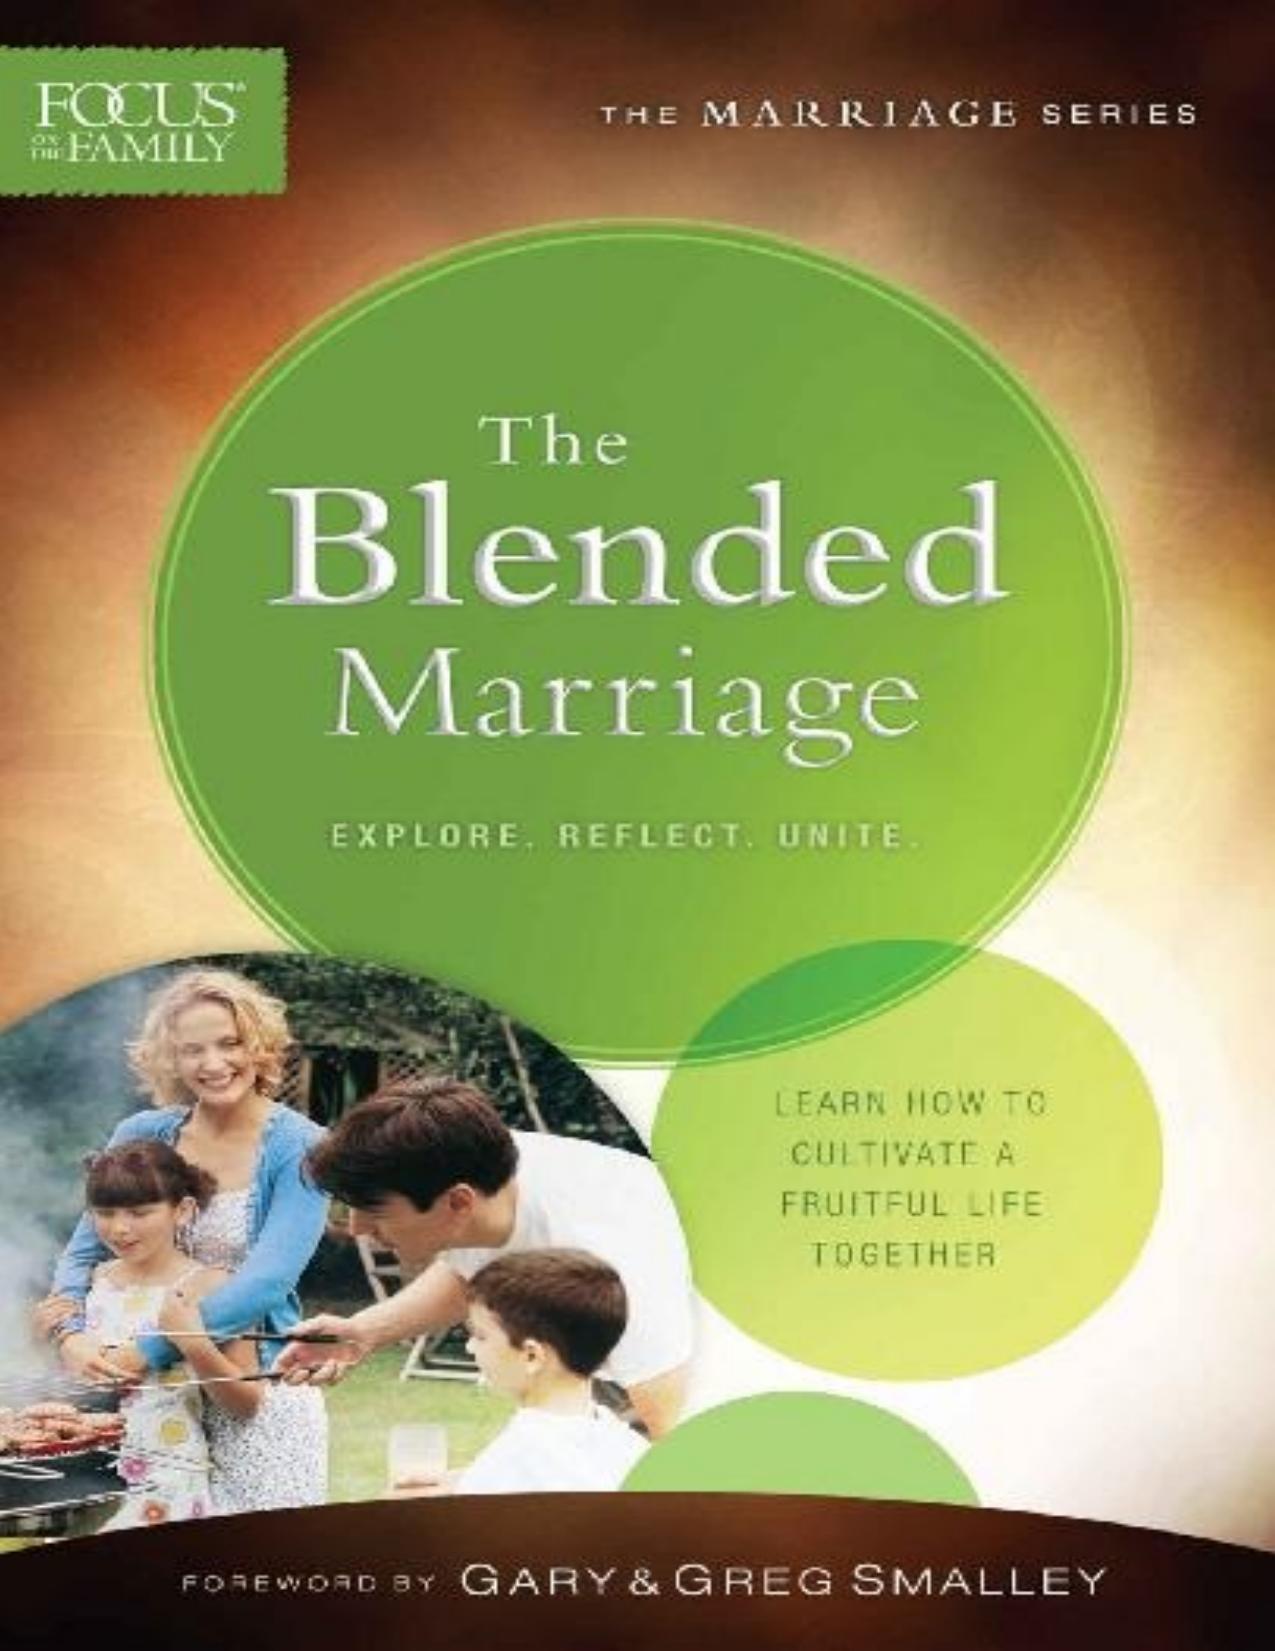 The Blended Marriage \(Focus on the Family Marriage Series\) - PDFDrive.com